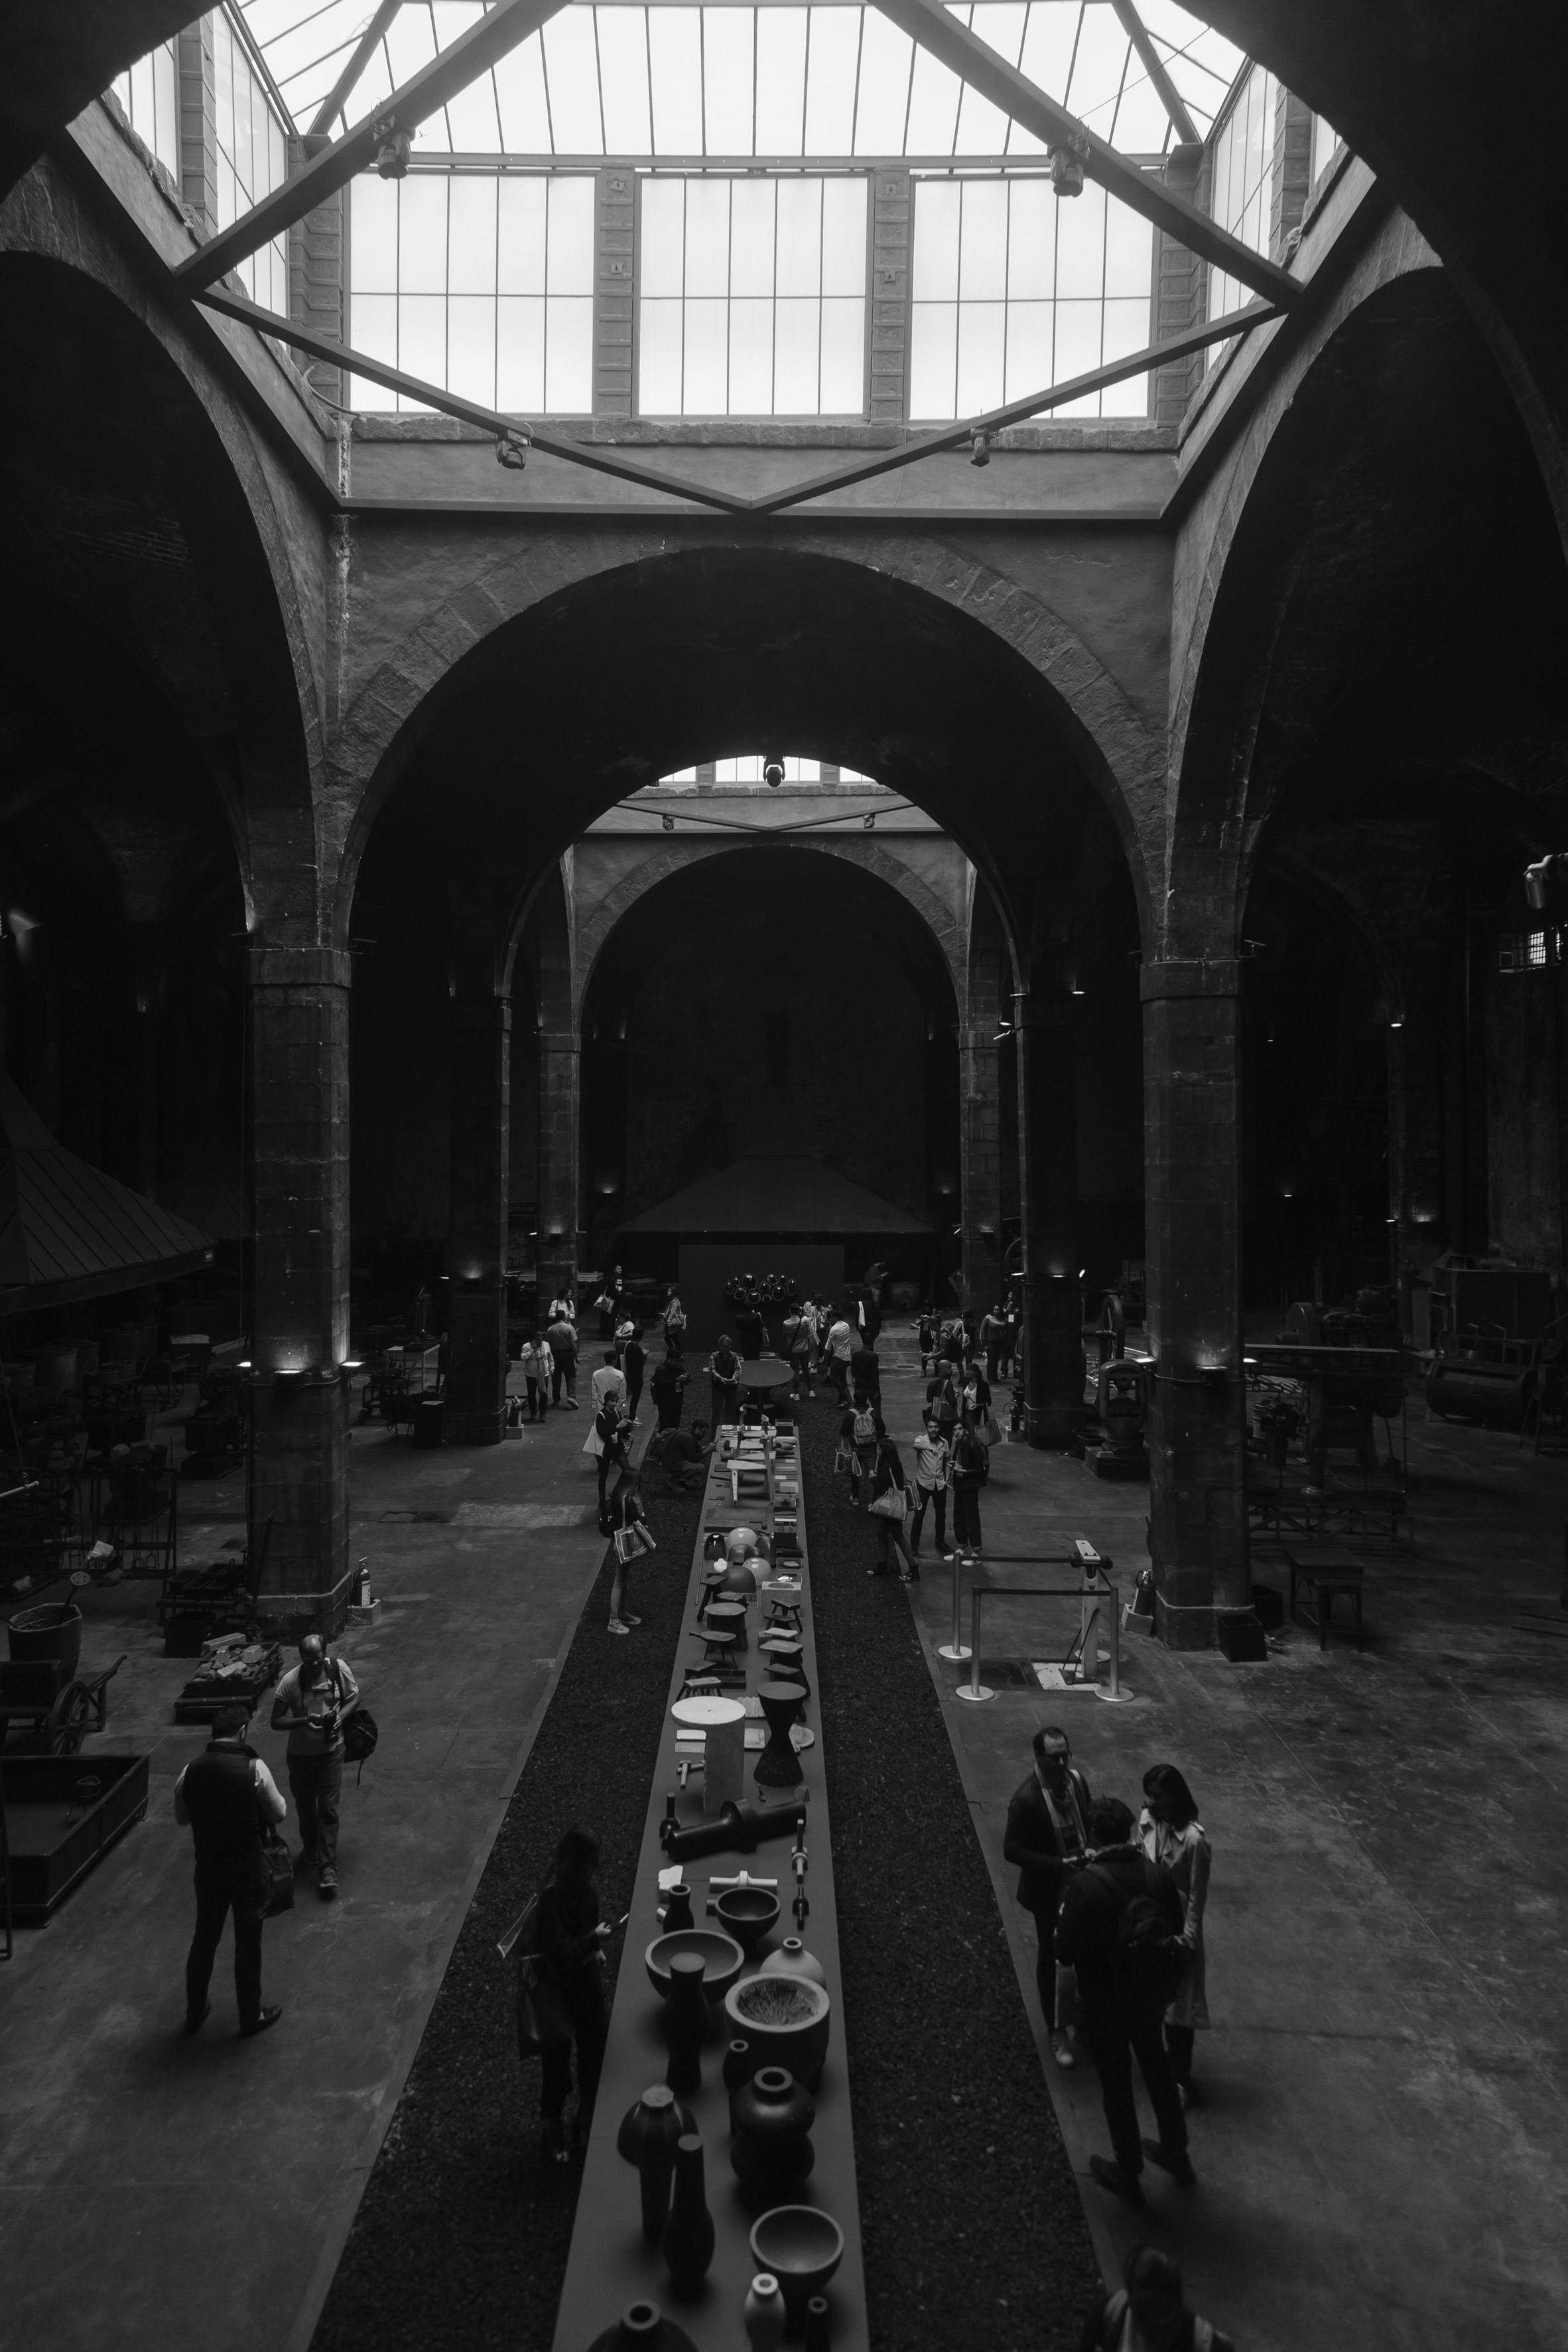 Blackened Mexico City coin factory provides moody setting for EWE exhibit